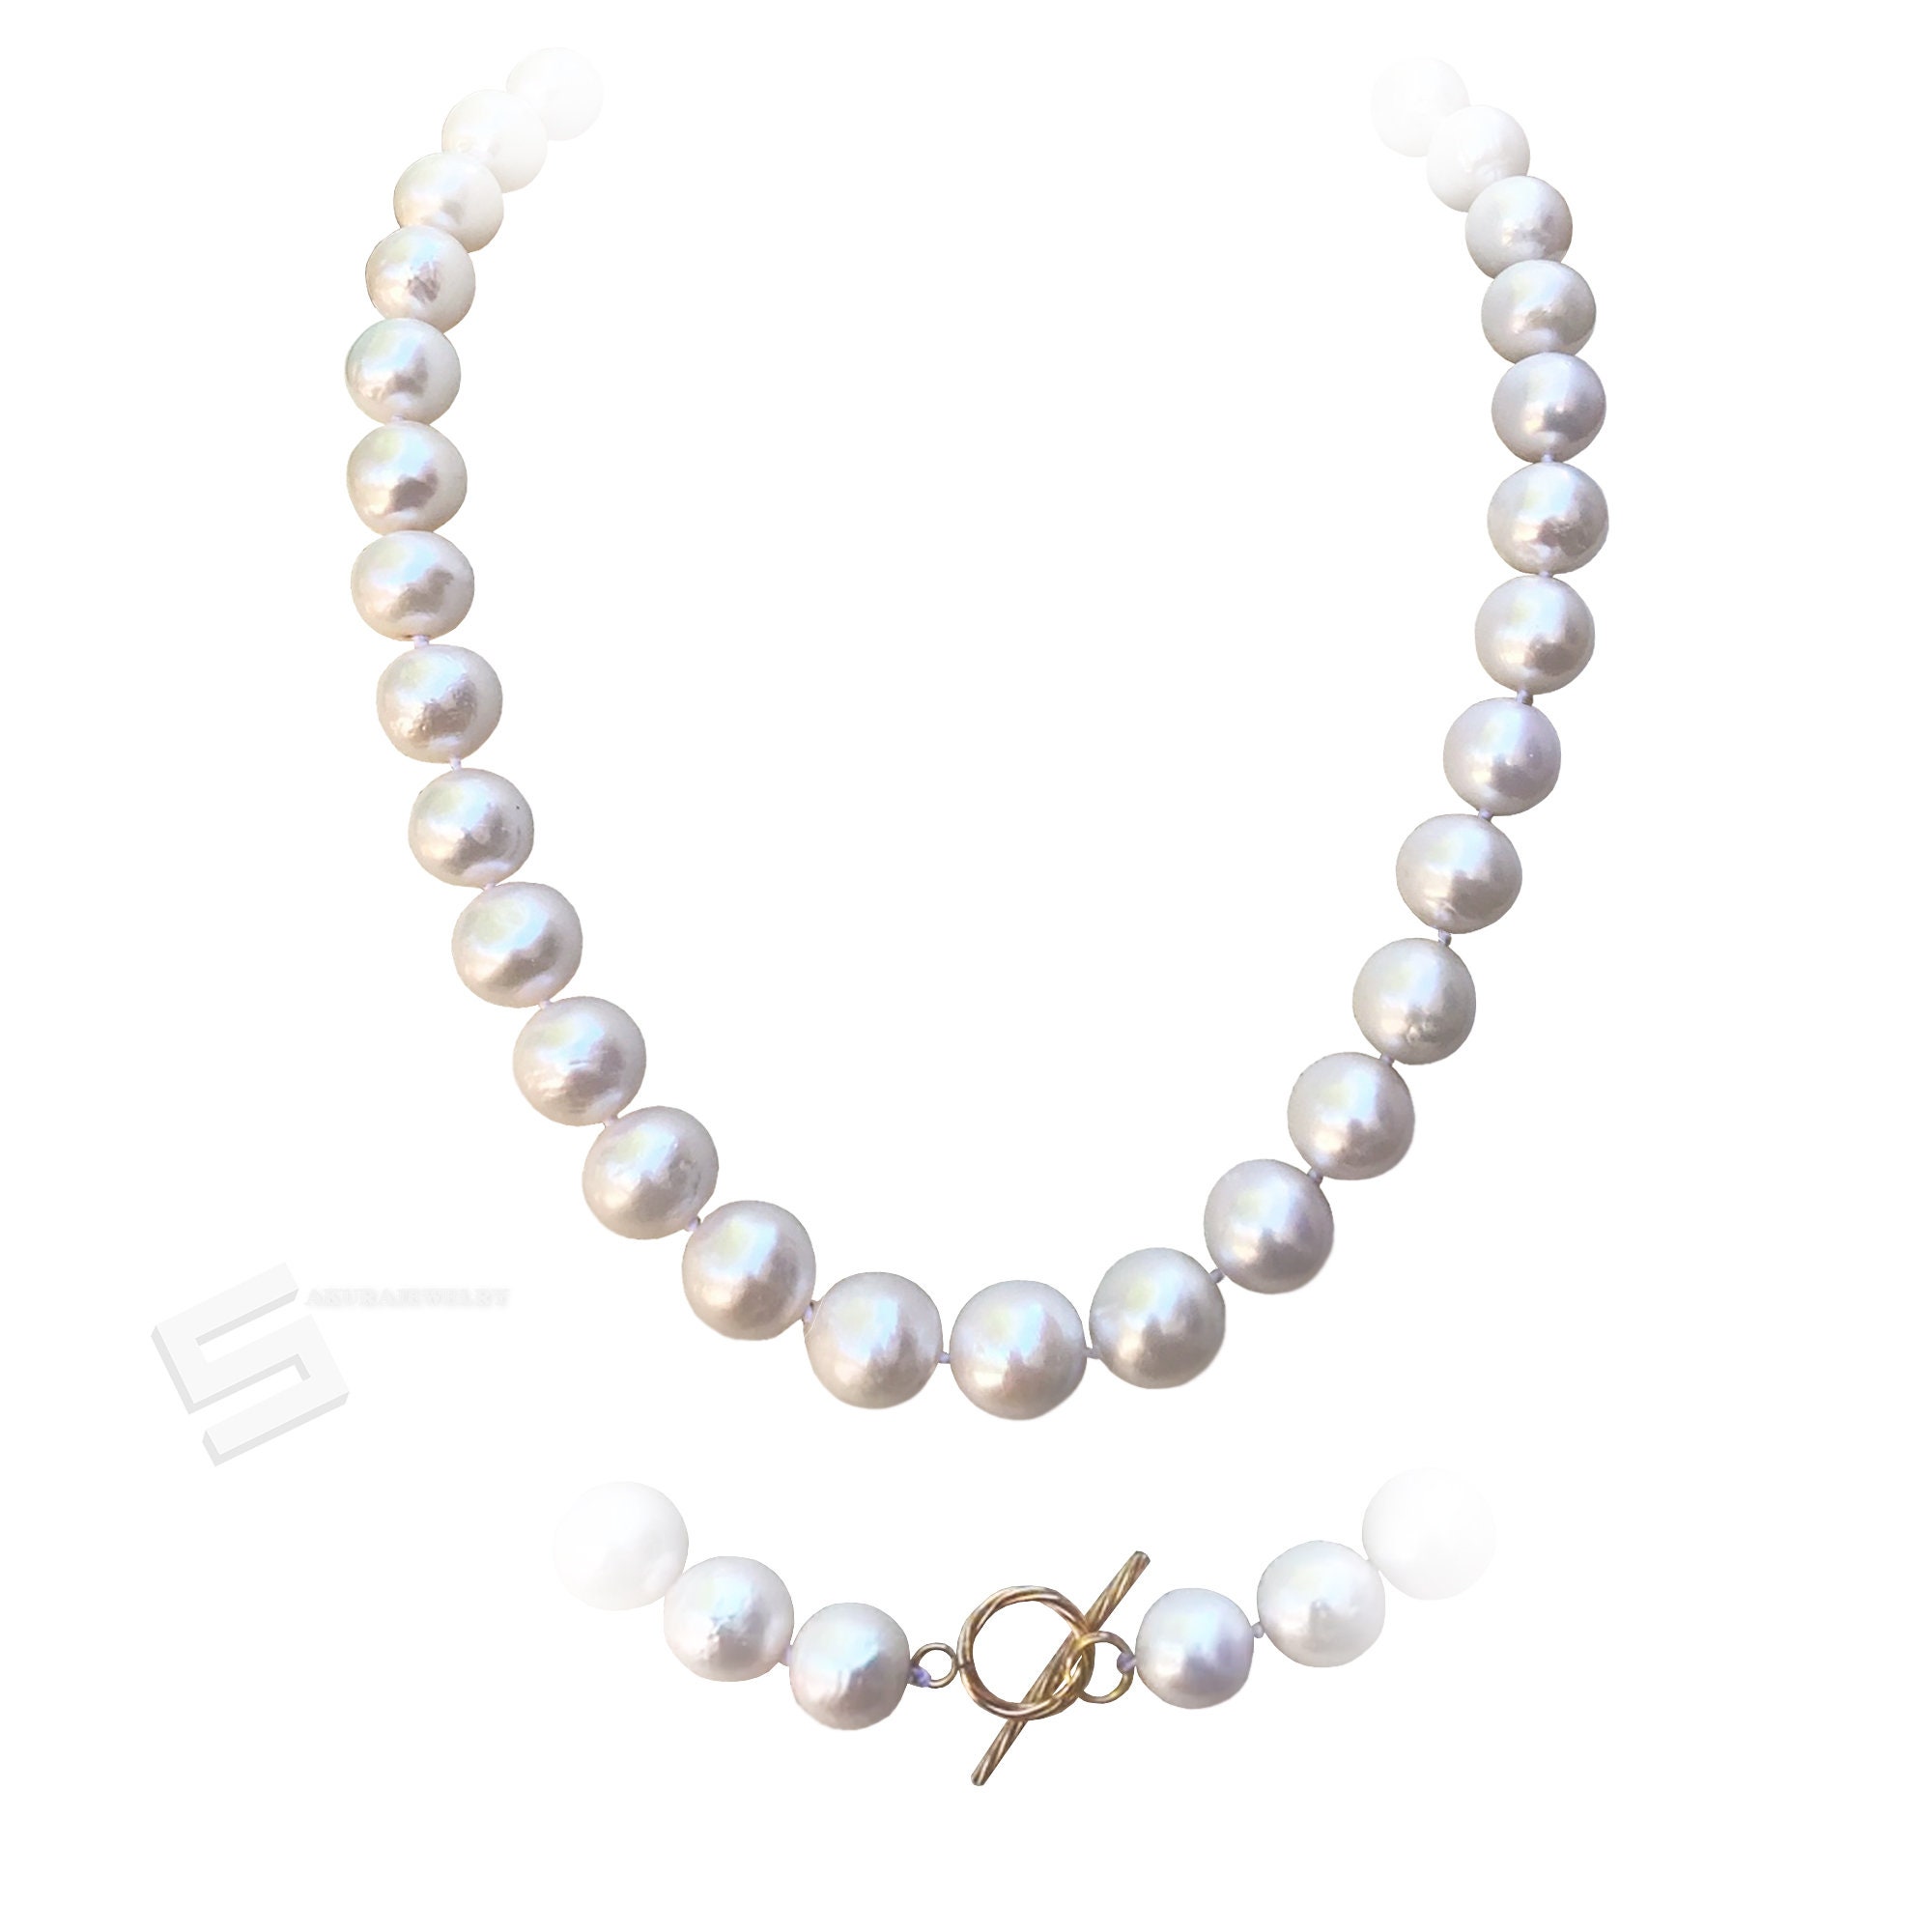 Jewelry Best Seller 14K Gold and Fresh Water Cultured Pearl/Bead Necklace 